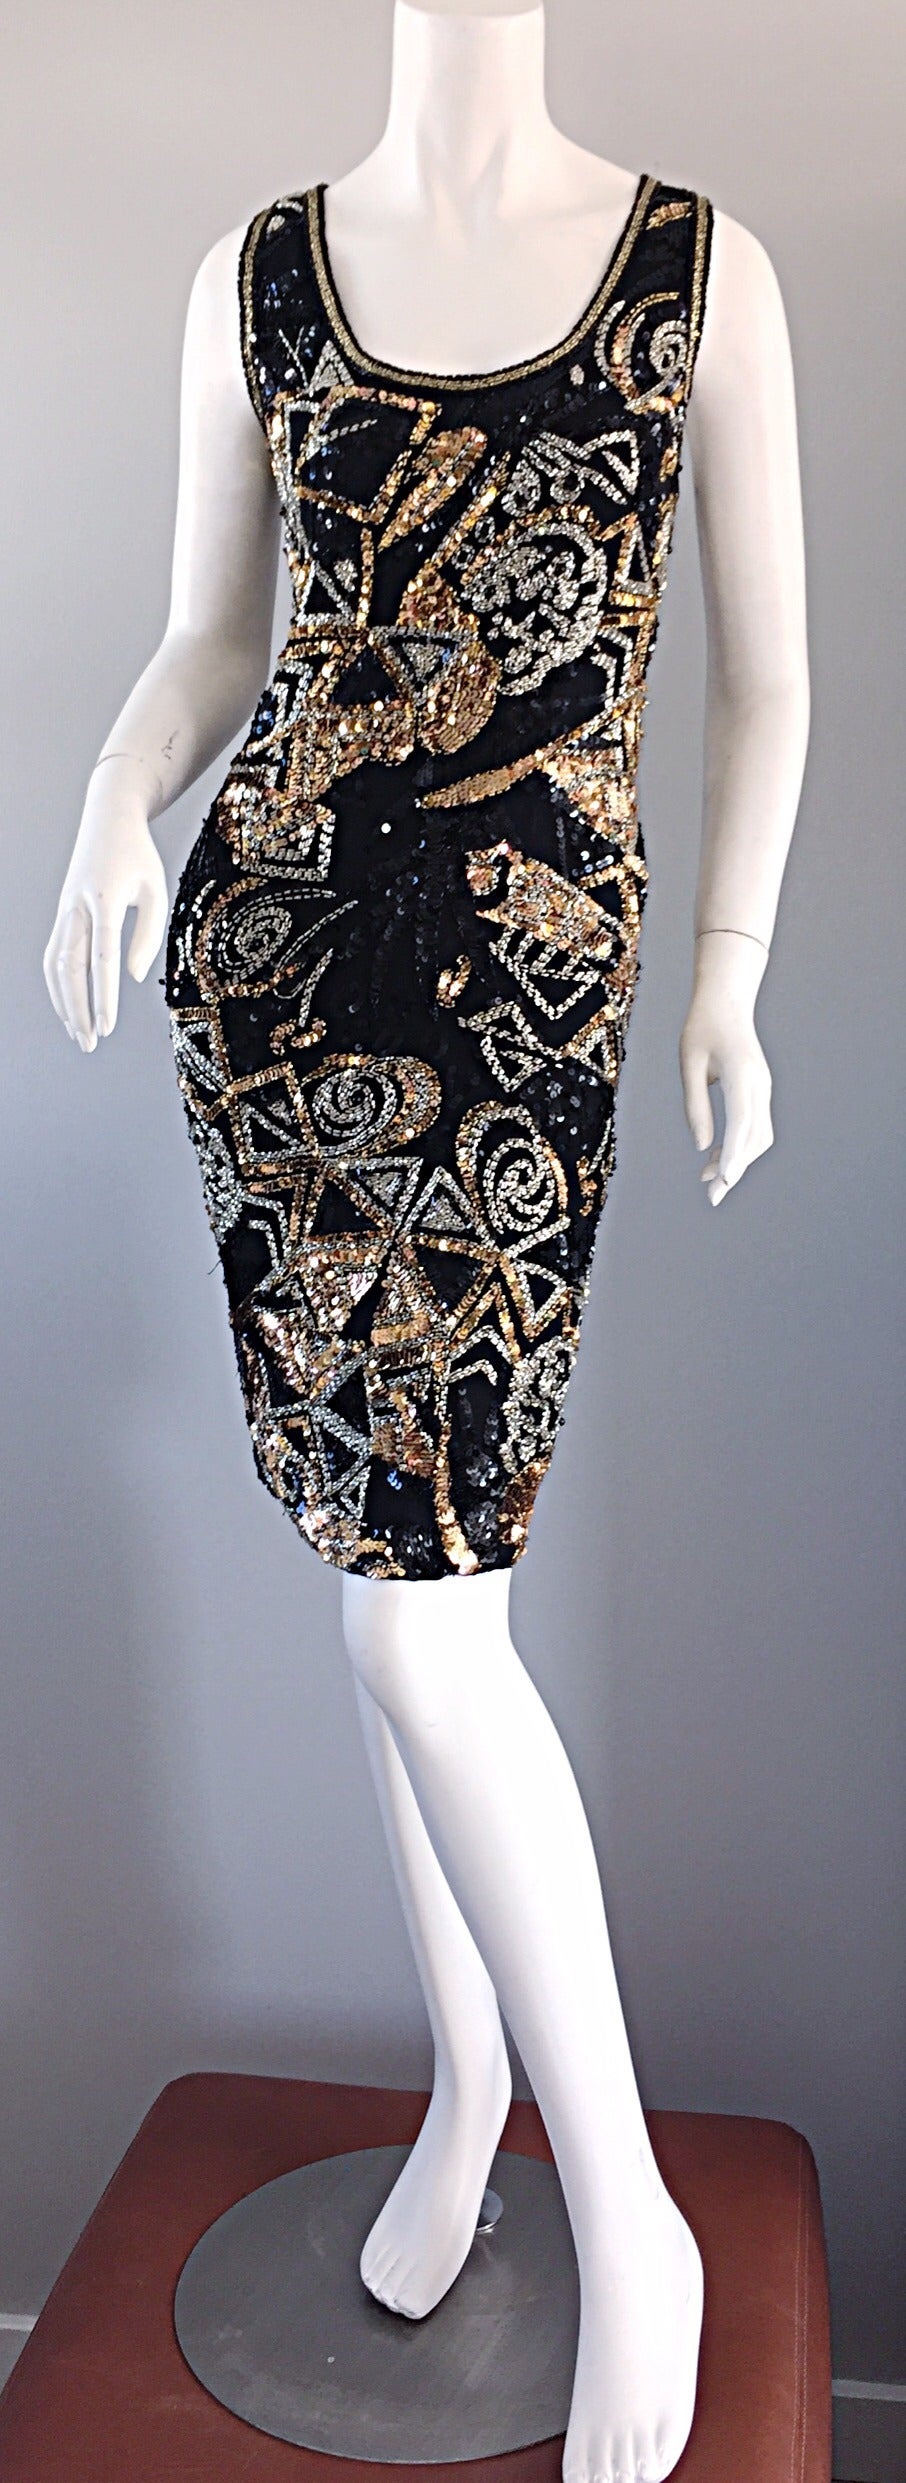 Outstanding vintage Oleg Cassini beaded/sequined cocktail dress! 100% silk shell, with thousands of gold, silver, and black sequins and beads throughout, which form a 'Galaxy